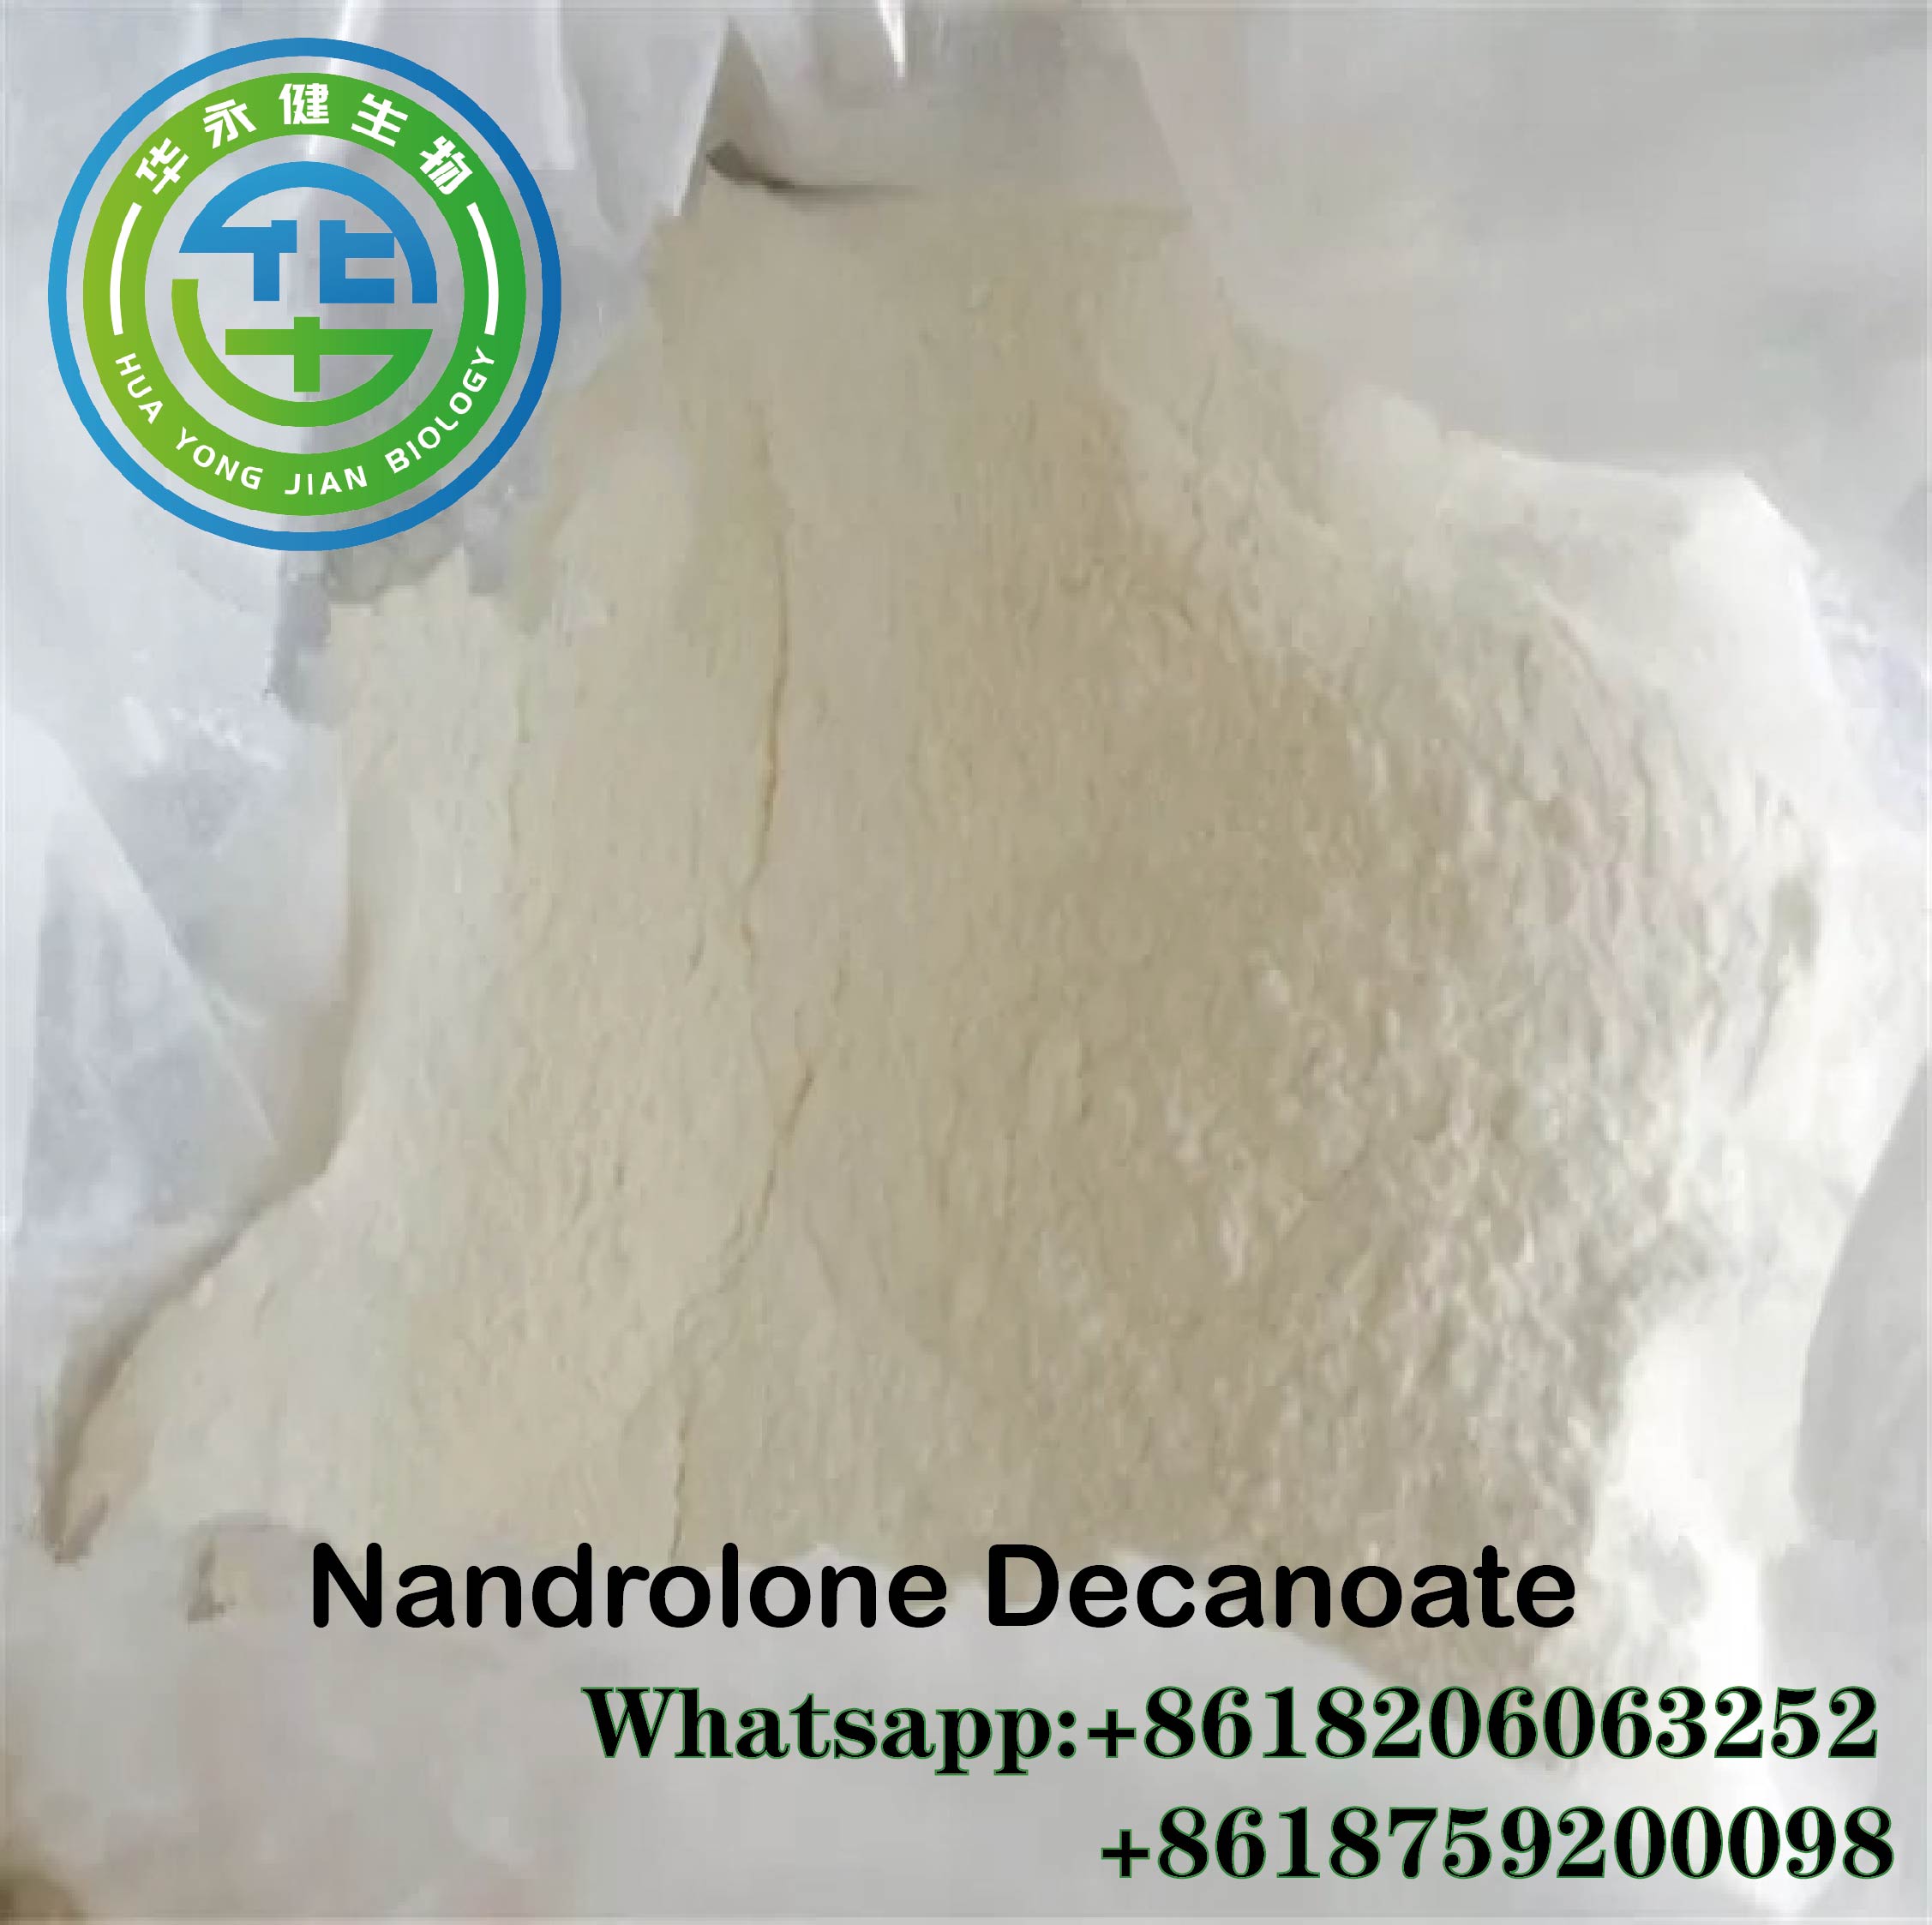 Muscle Growth Steroids Nandrolone Decanoate Pure Raw Enhancer Powder Deca Durabolin Injectable Liquid CAS 360-70-3 